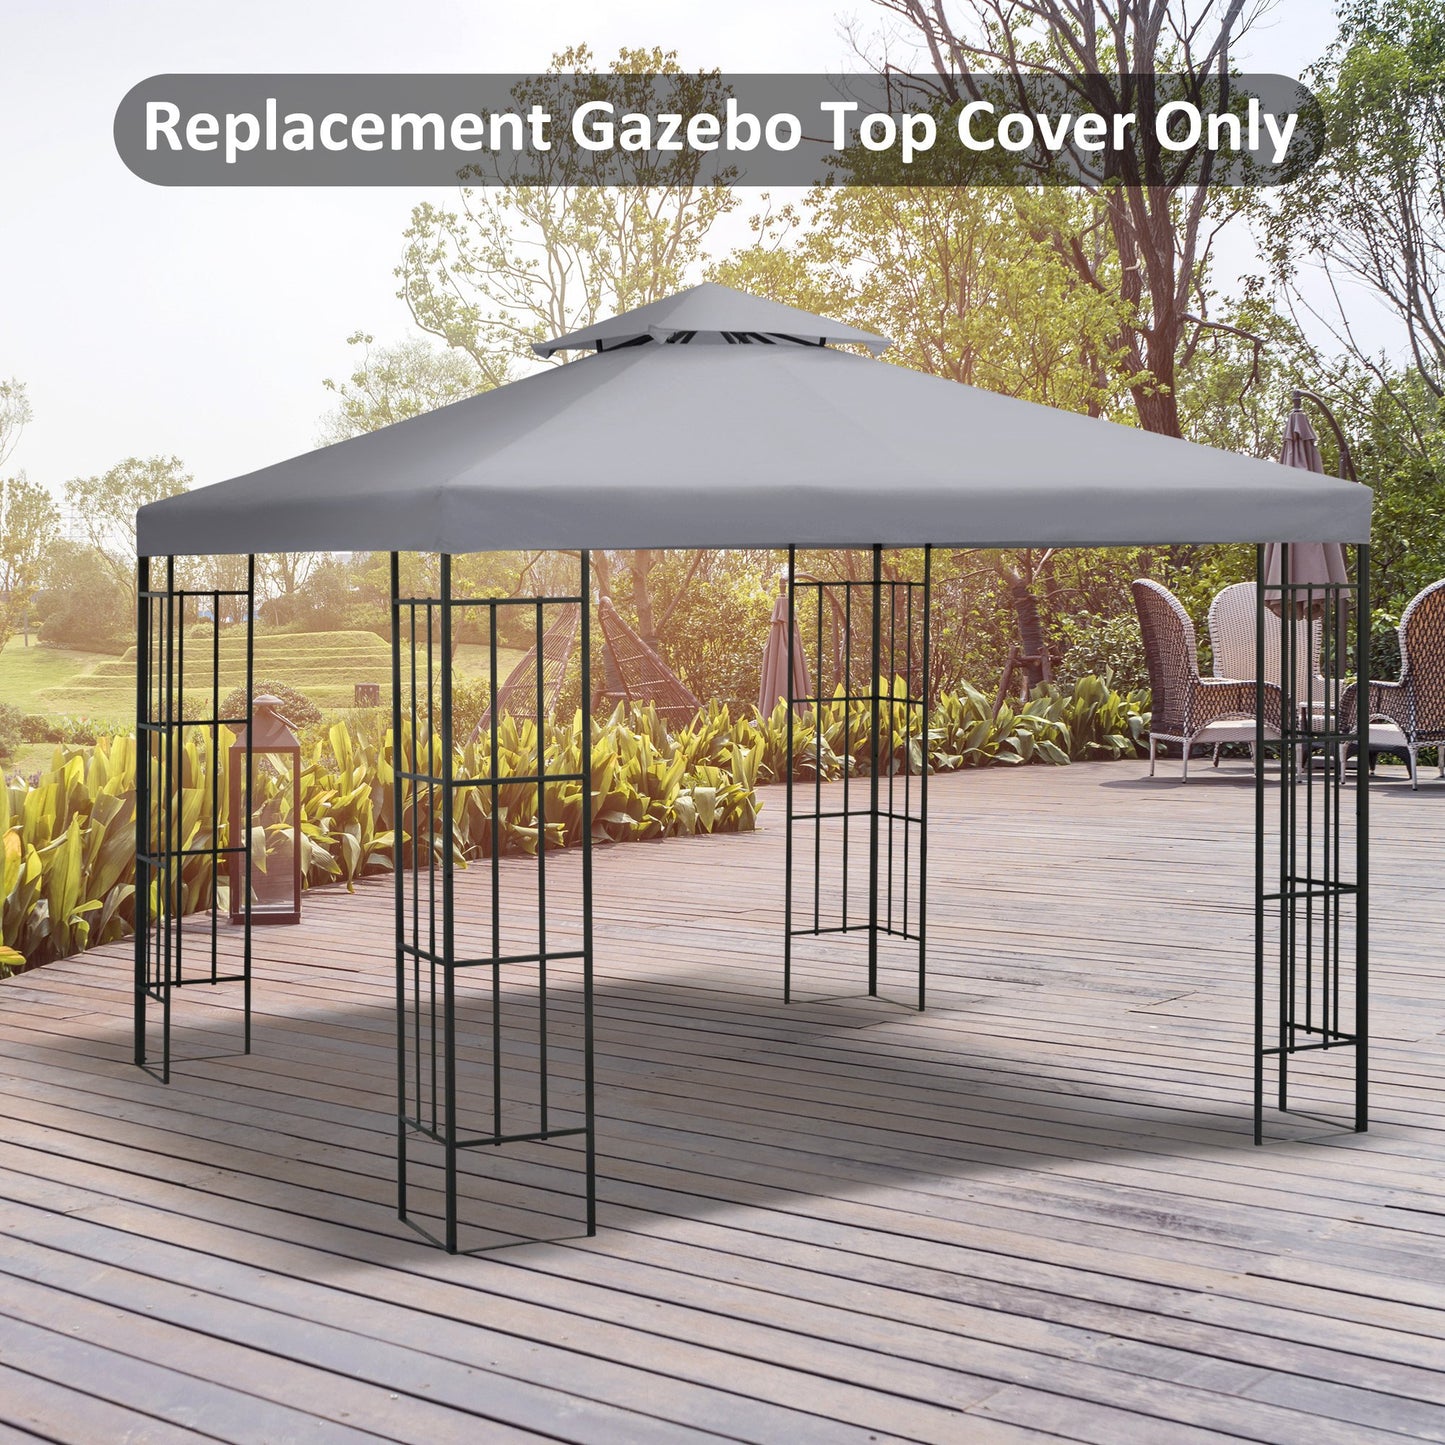 Outsunny 3(m) Gazebo Top Cover Double Tier Canopy Replacement Pavilion Roof Light Grey